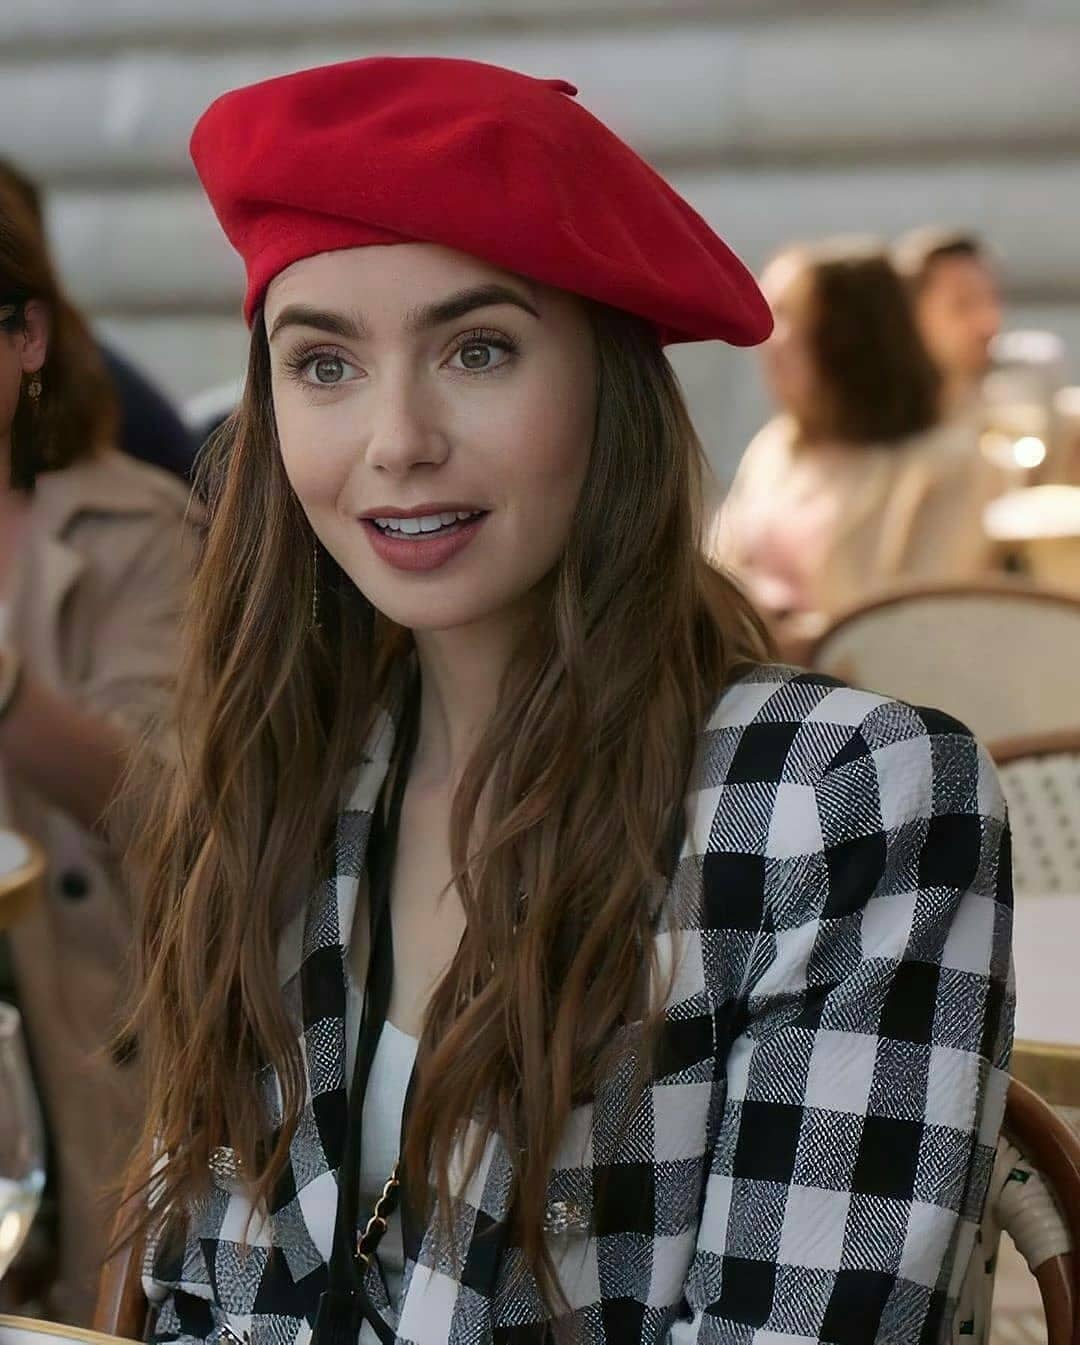 Lily collins serie tv - neomag.